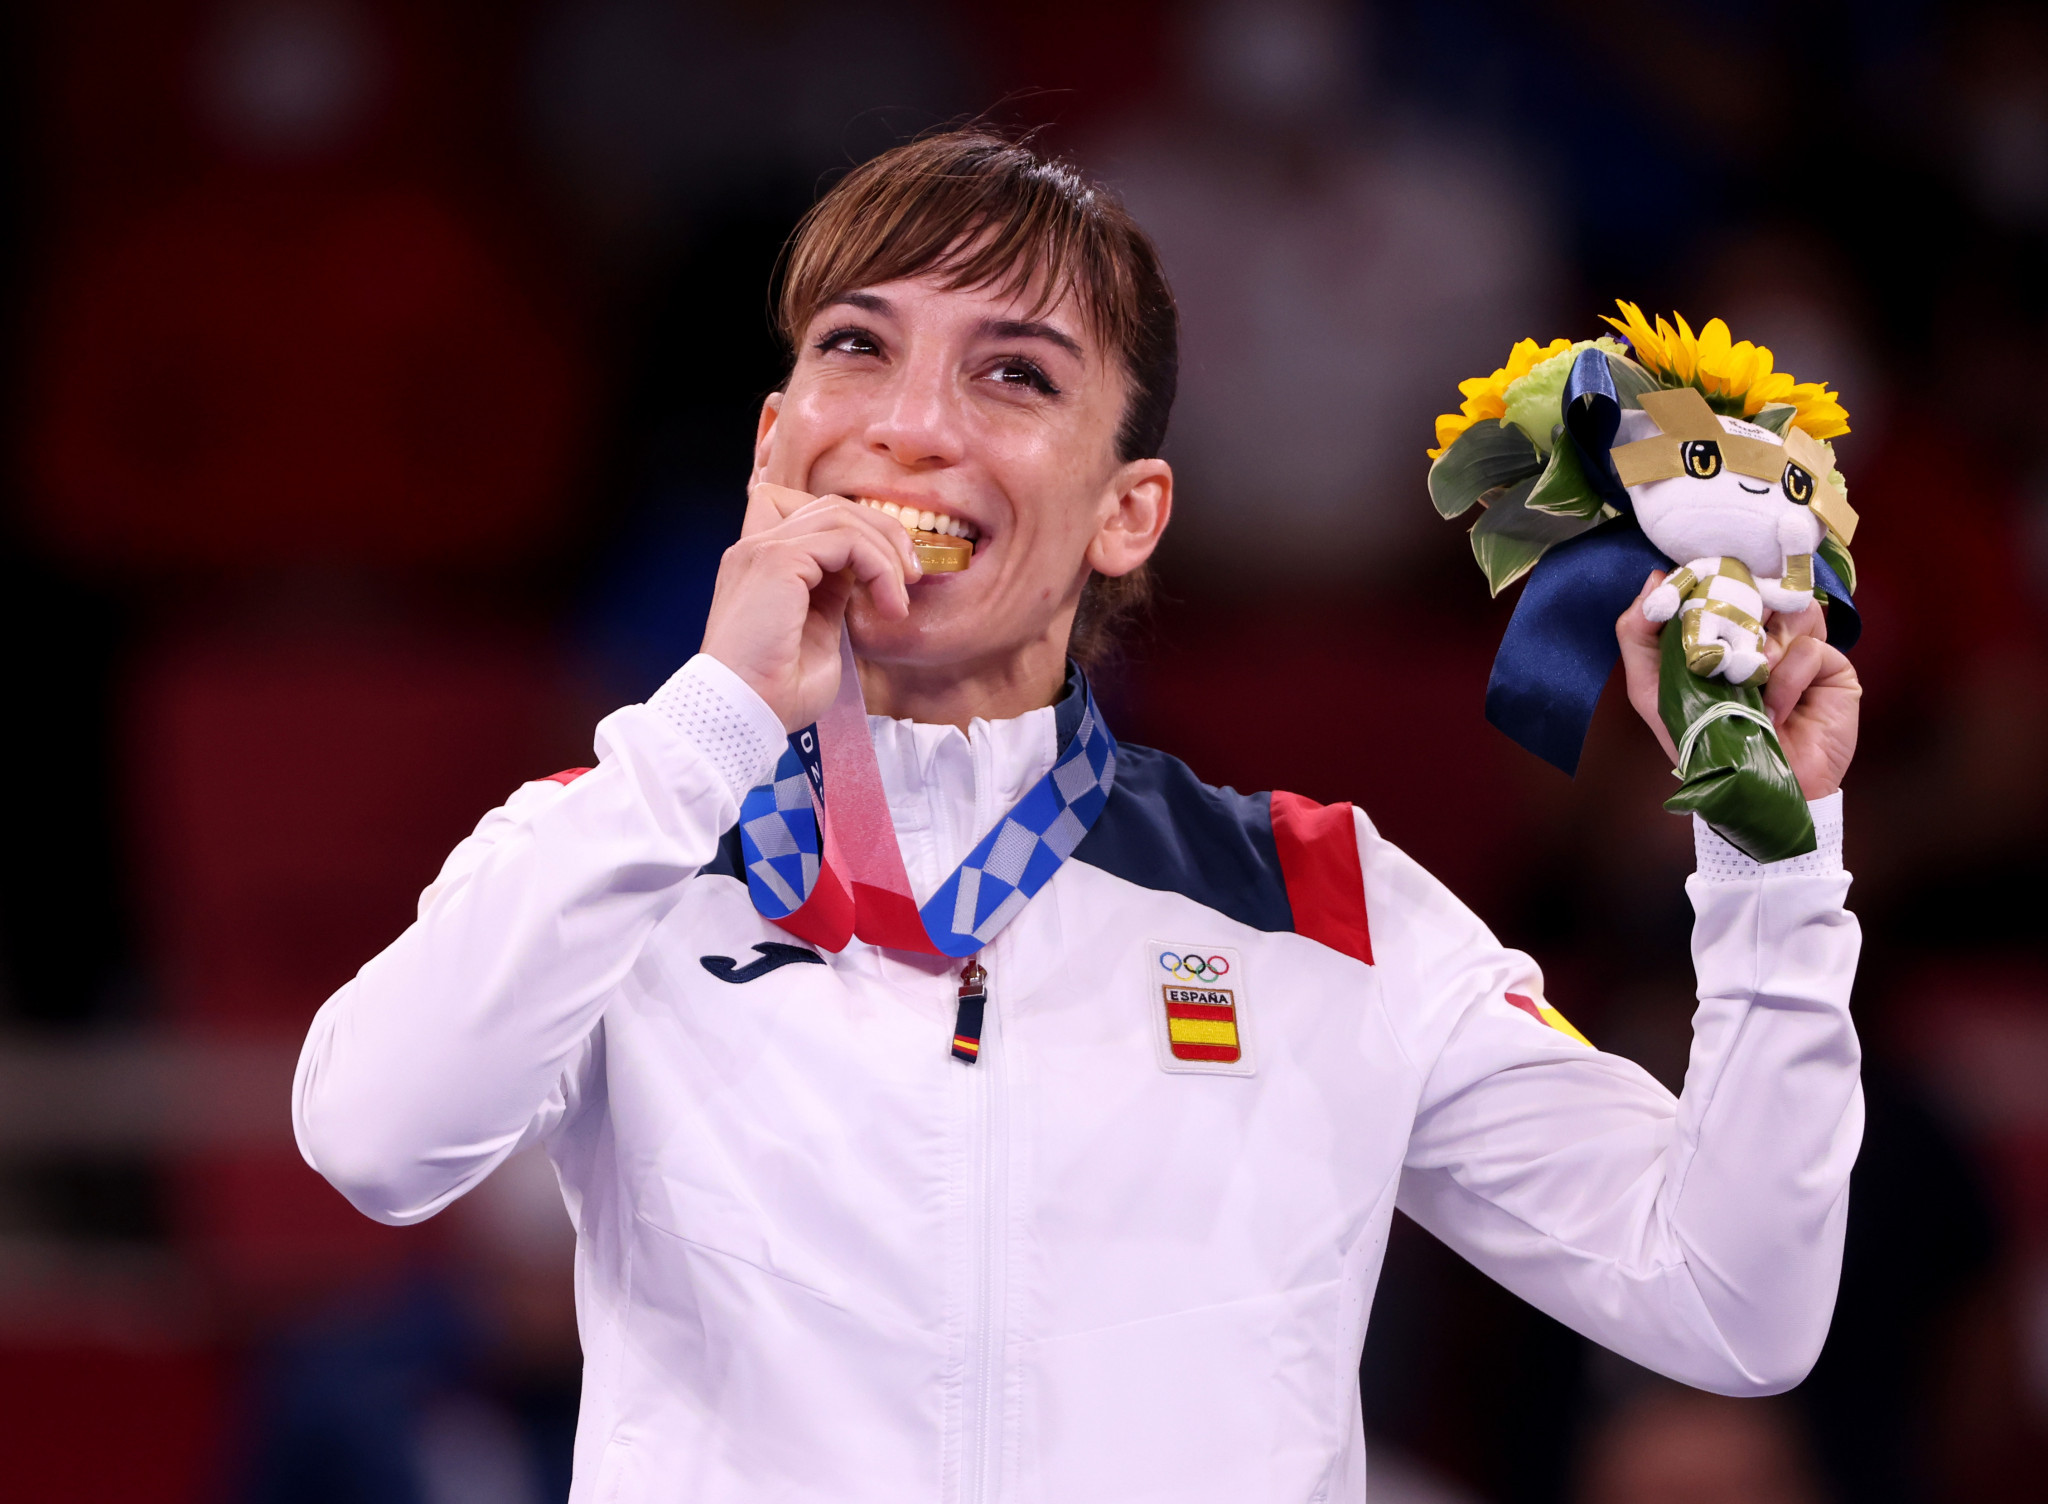 Sandra Sánchez won gold in kata at the Tokyo 2020 Olympic Games ©Getty Images